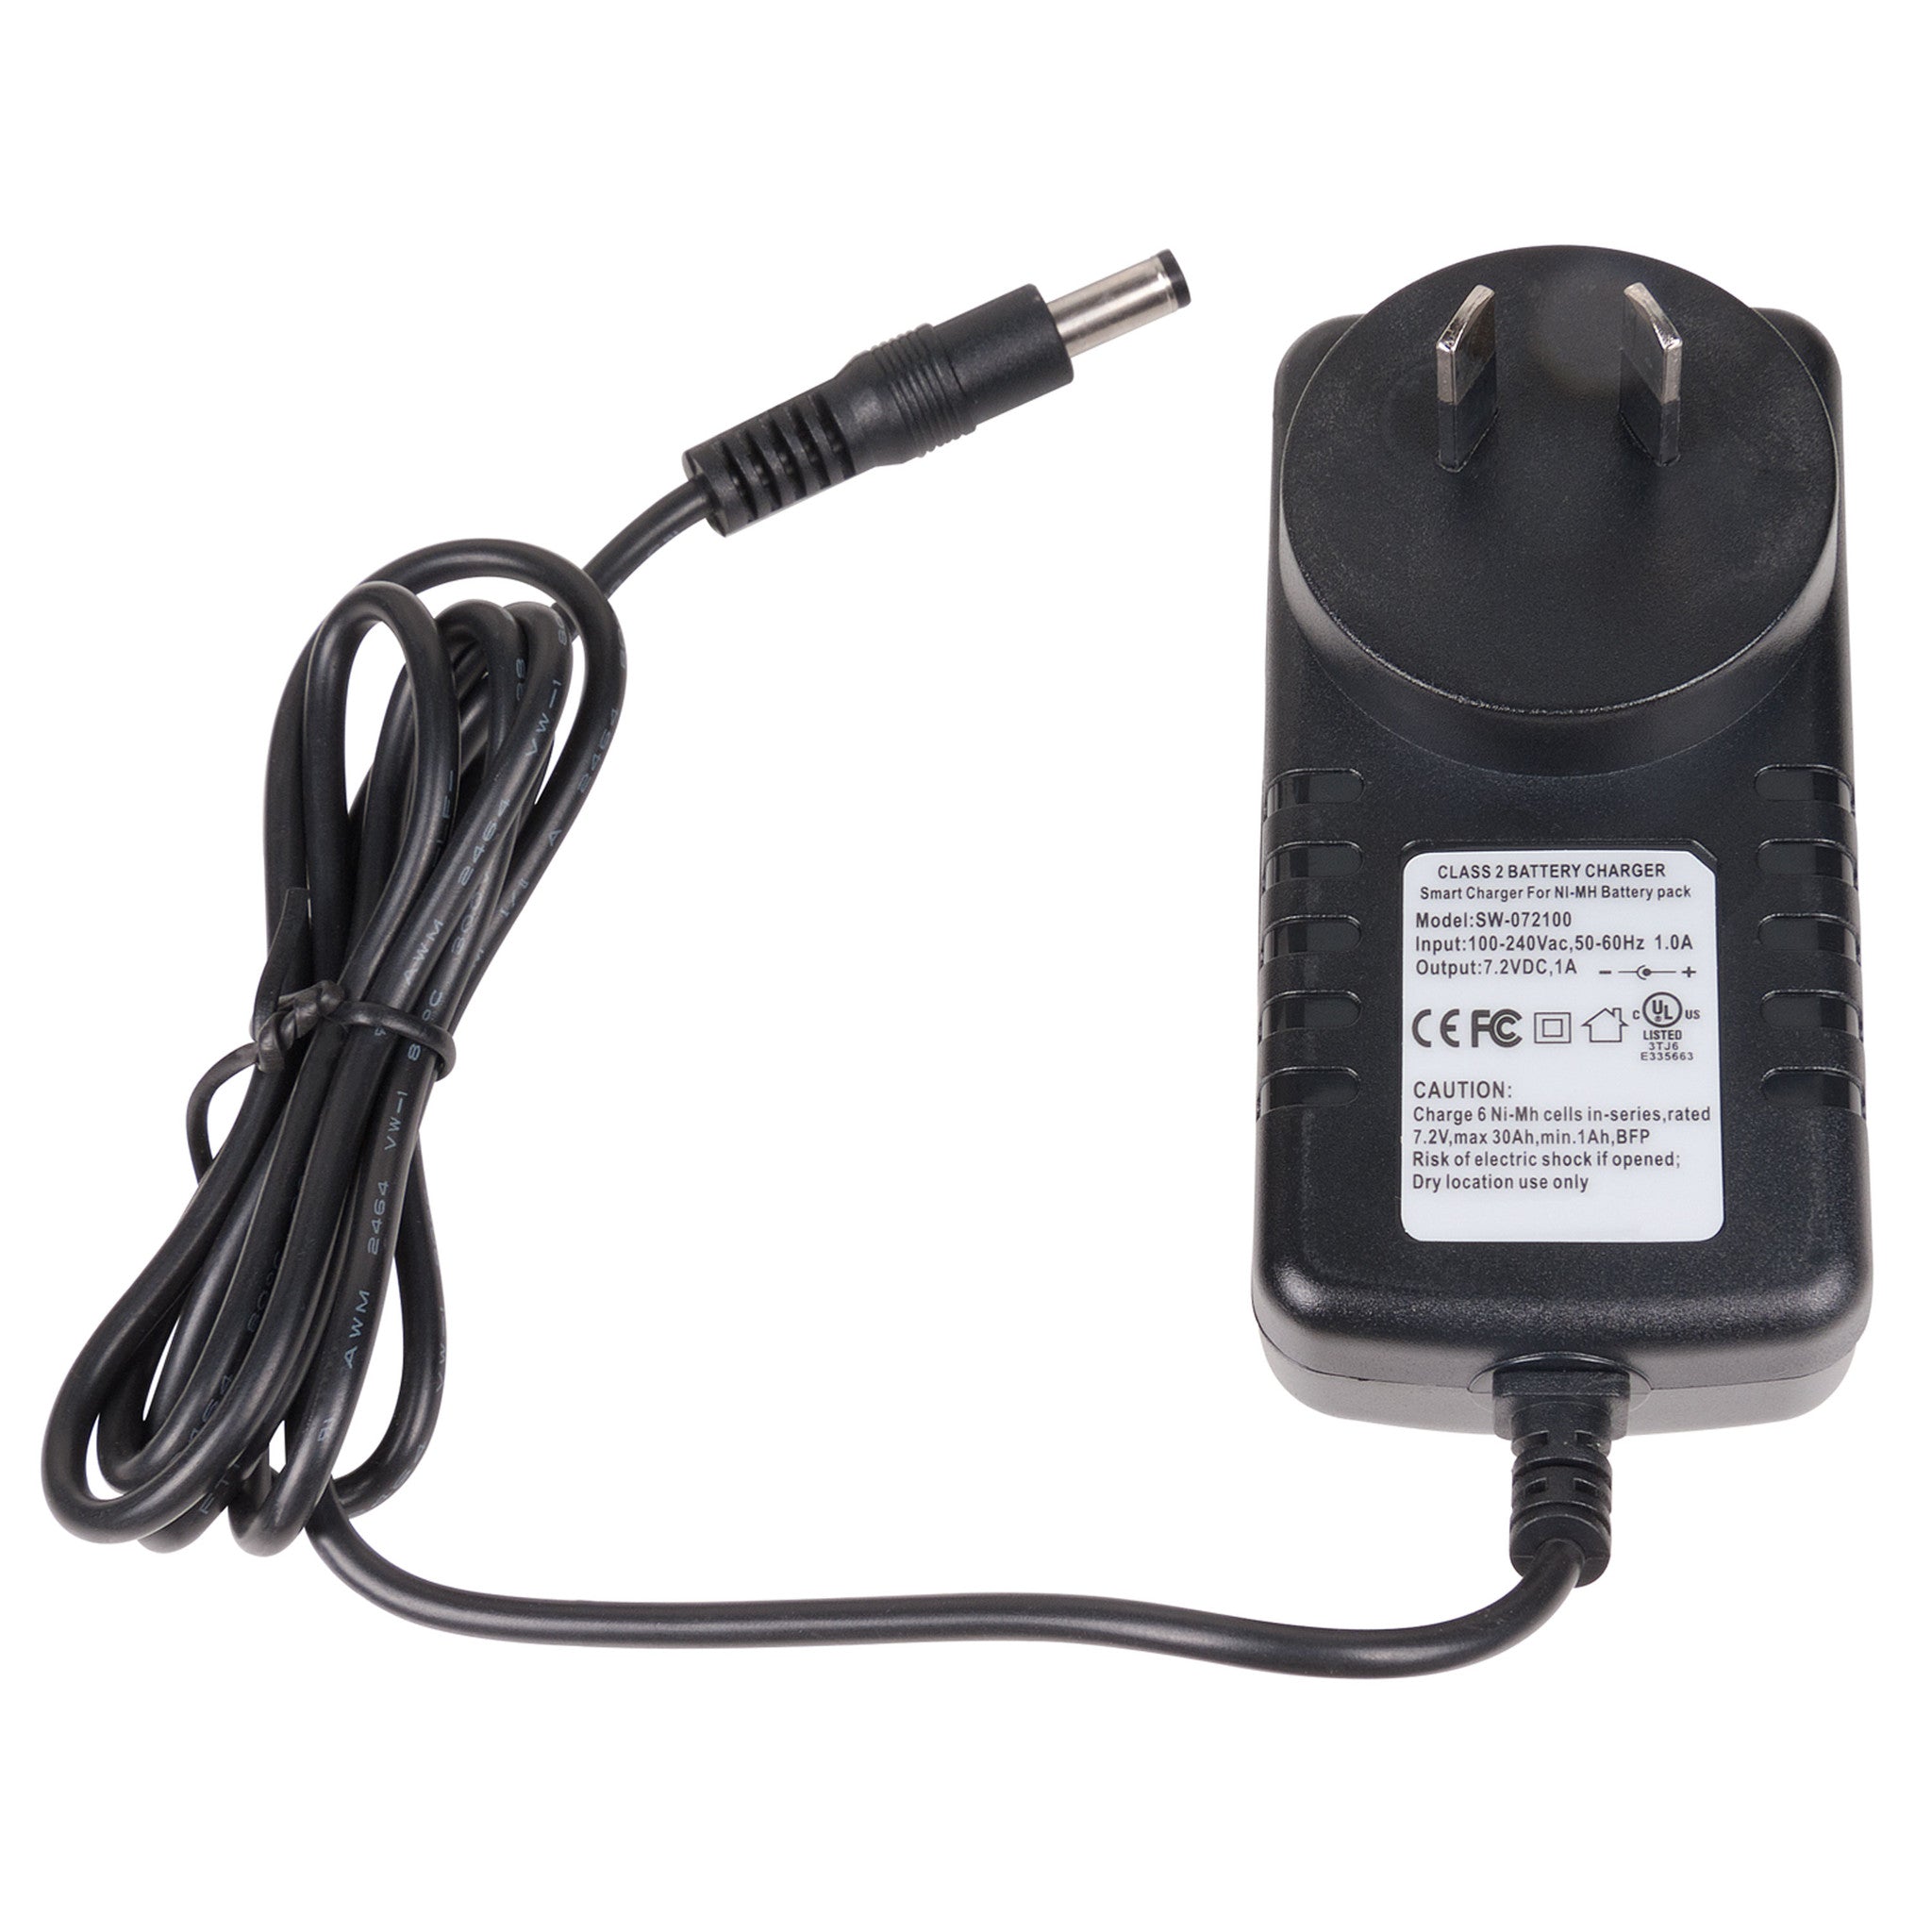 Smart Charger for DS161, DS160, DS125 NiMH Battery Packs